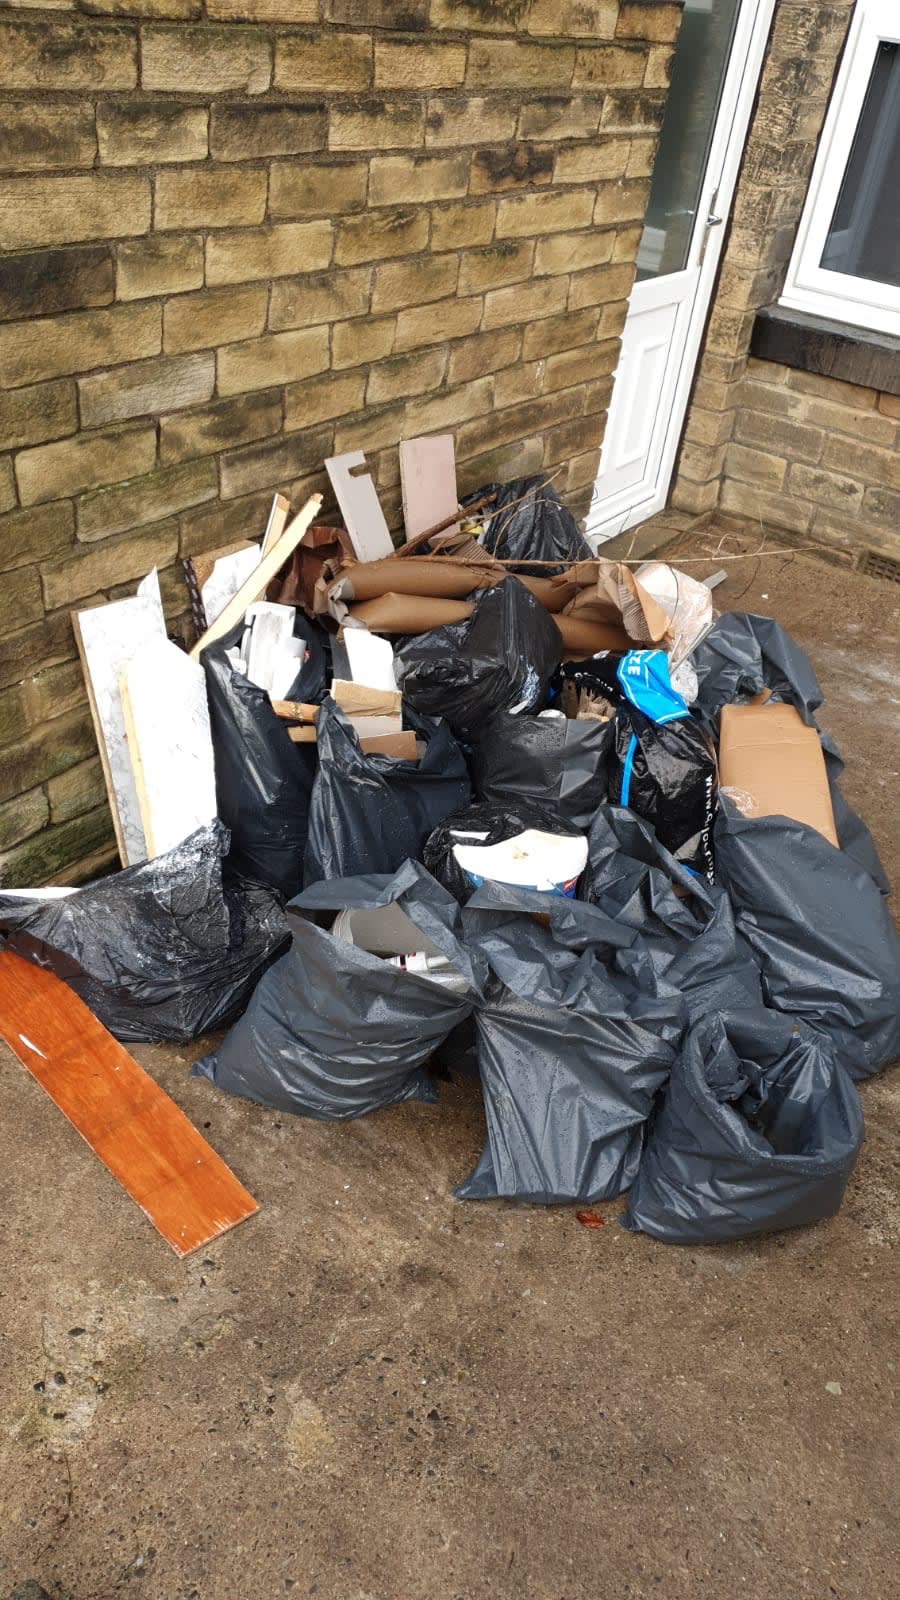 MBA Recycling Ltd House Clearance & Rubbish Removal Bradford 07923 231785